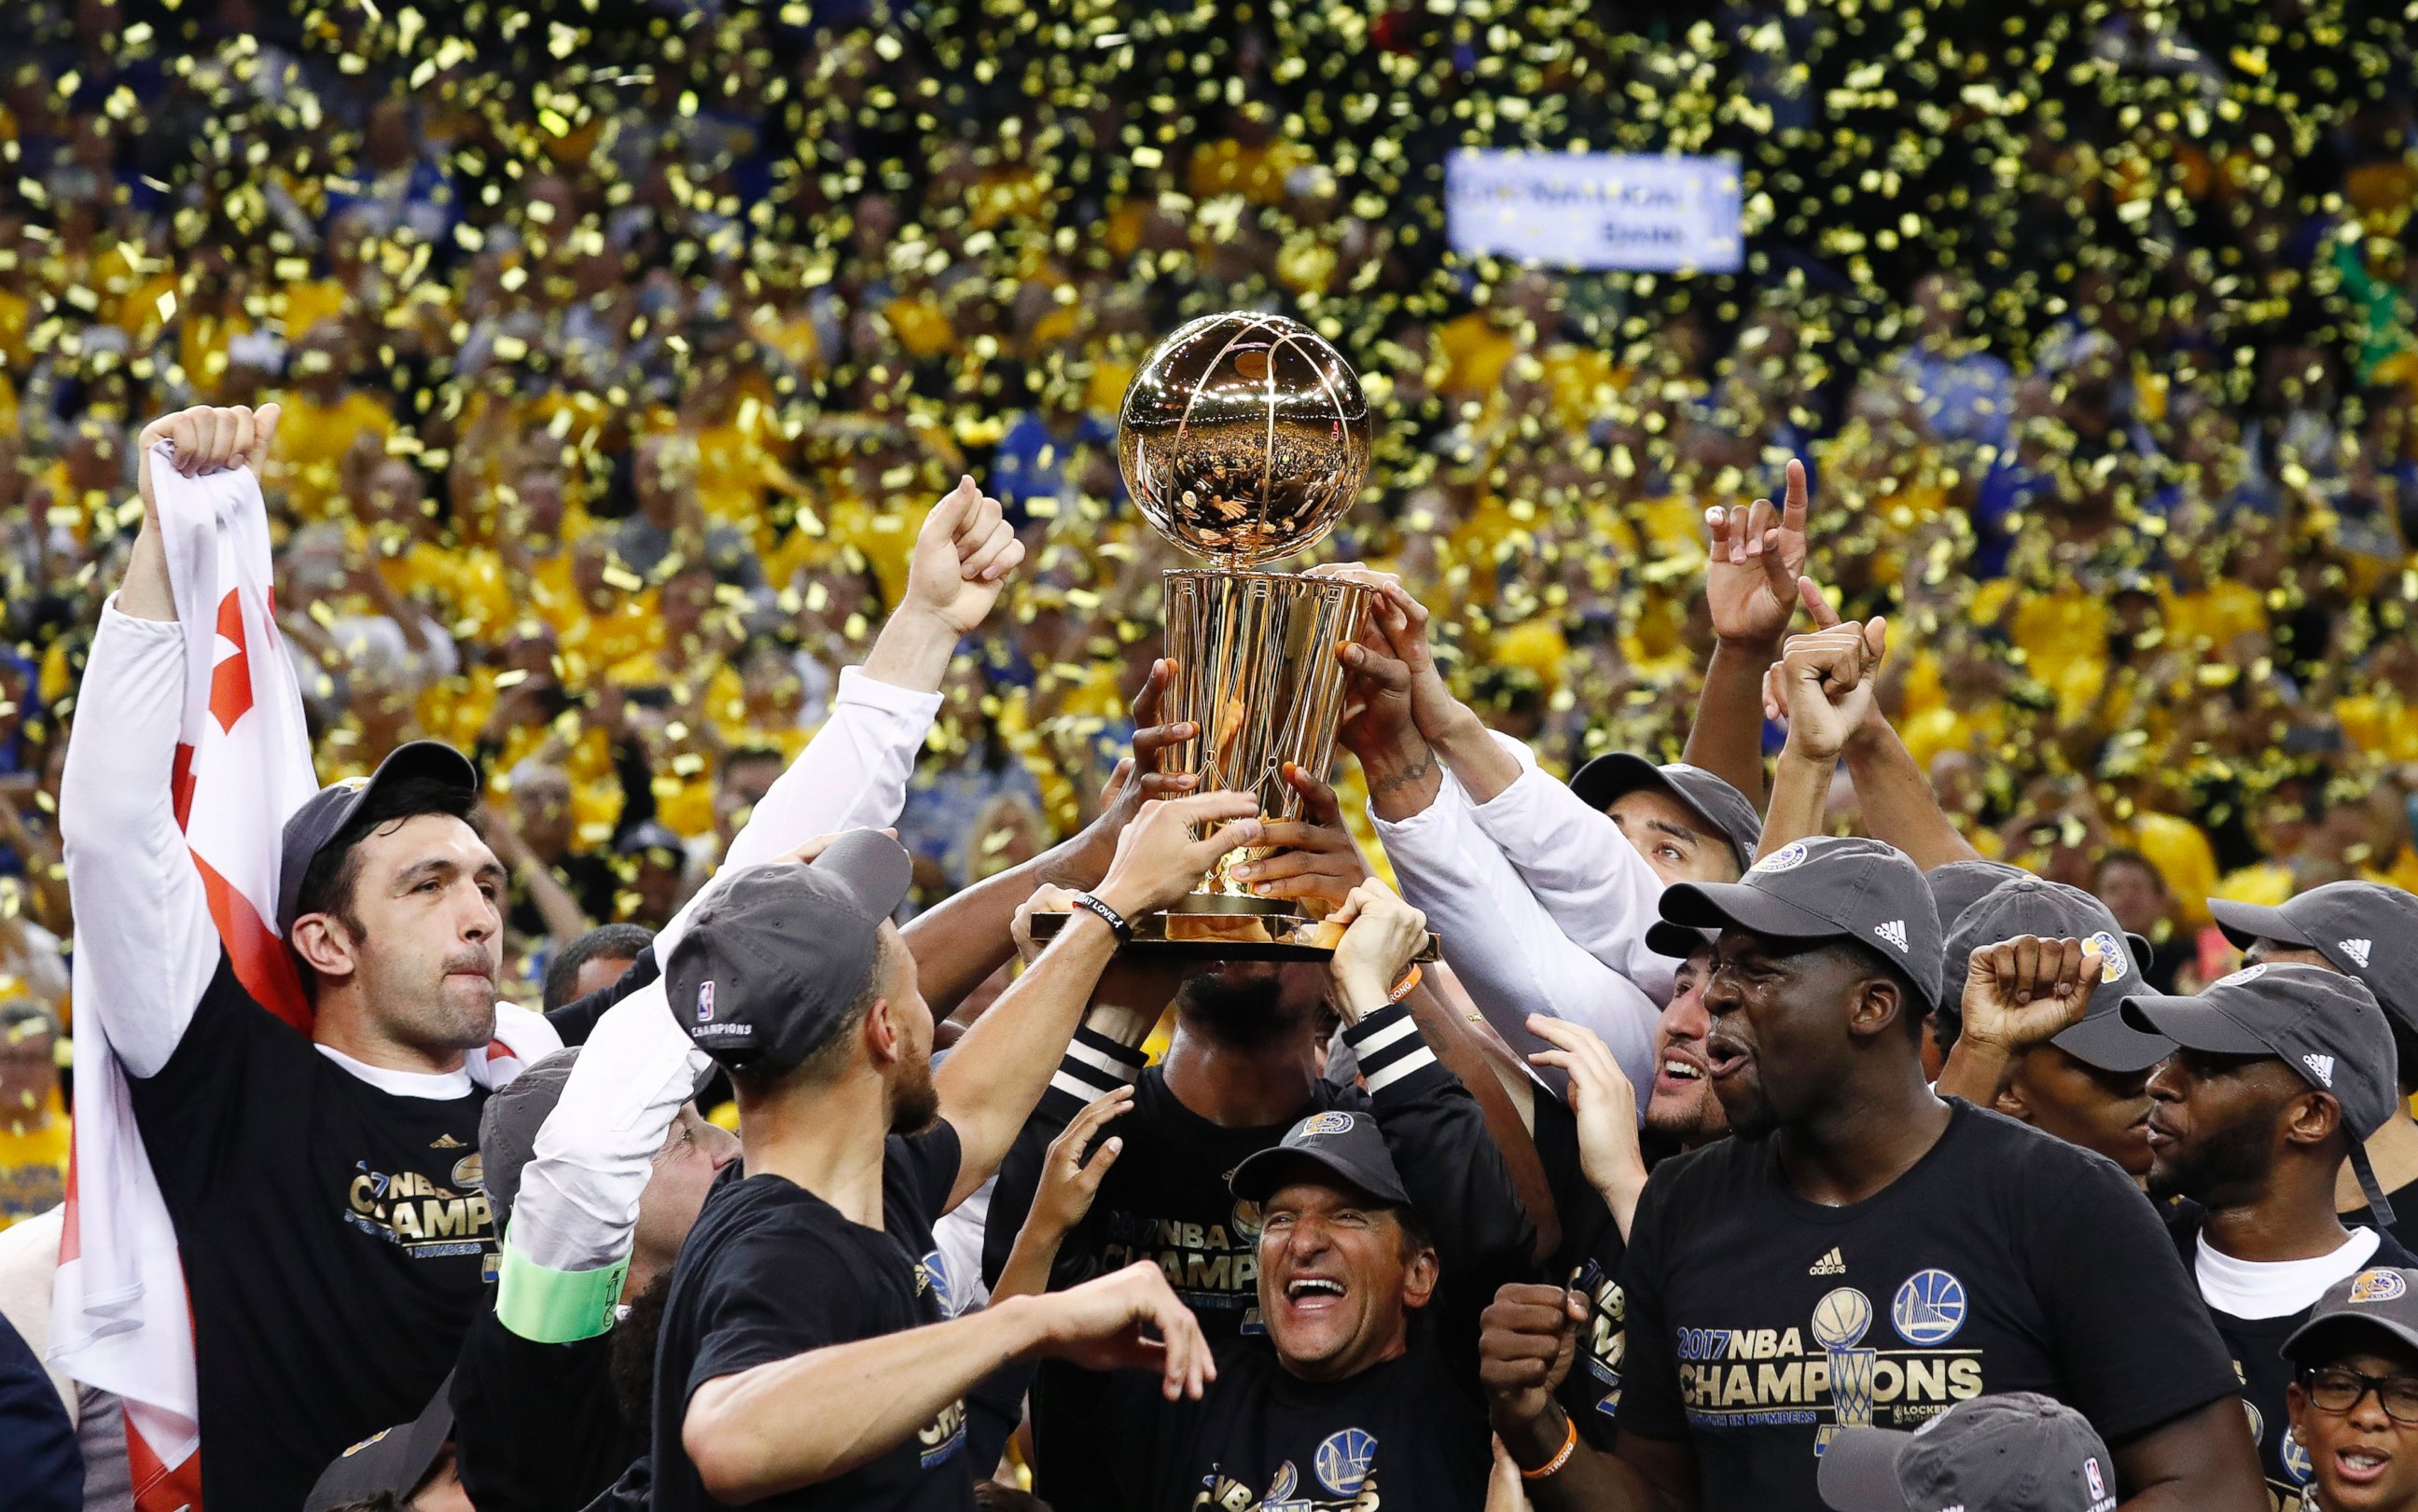 PHOTO: The Golden State Warriors celebrate with the Larry O'Brien NBA Championship Trophy after winning the NBA Finals against the Cleveland Cavaliers in game five of the NBA Finals basketball game at Oracle Arena in Oakland, Calif., June 12, 2017.  